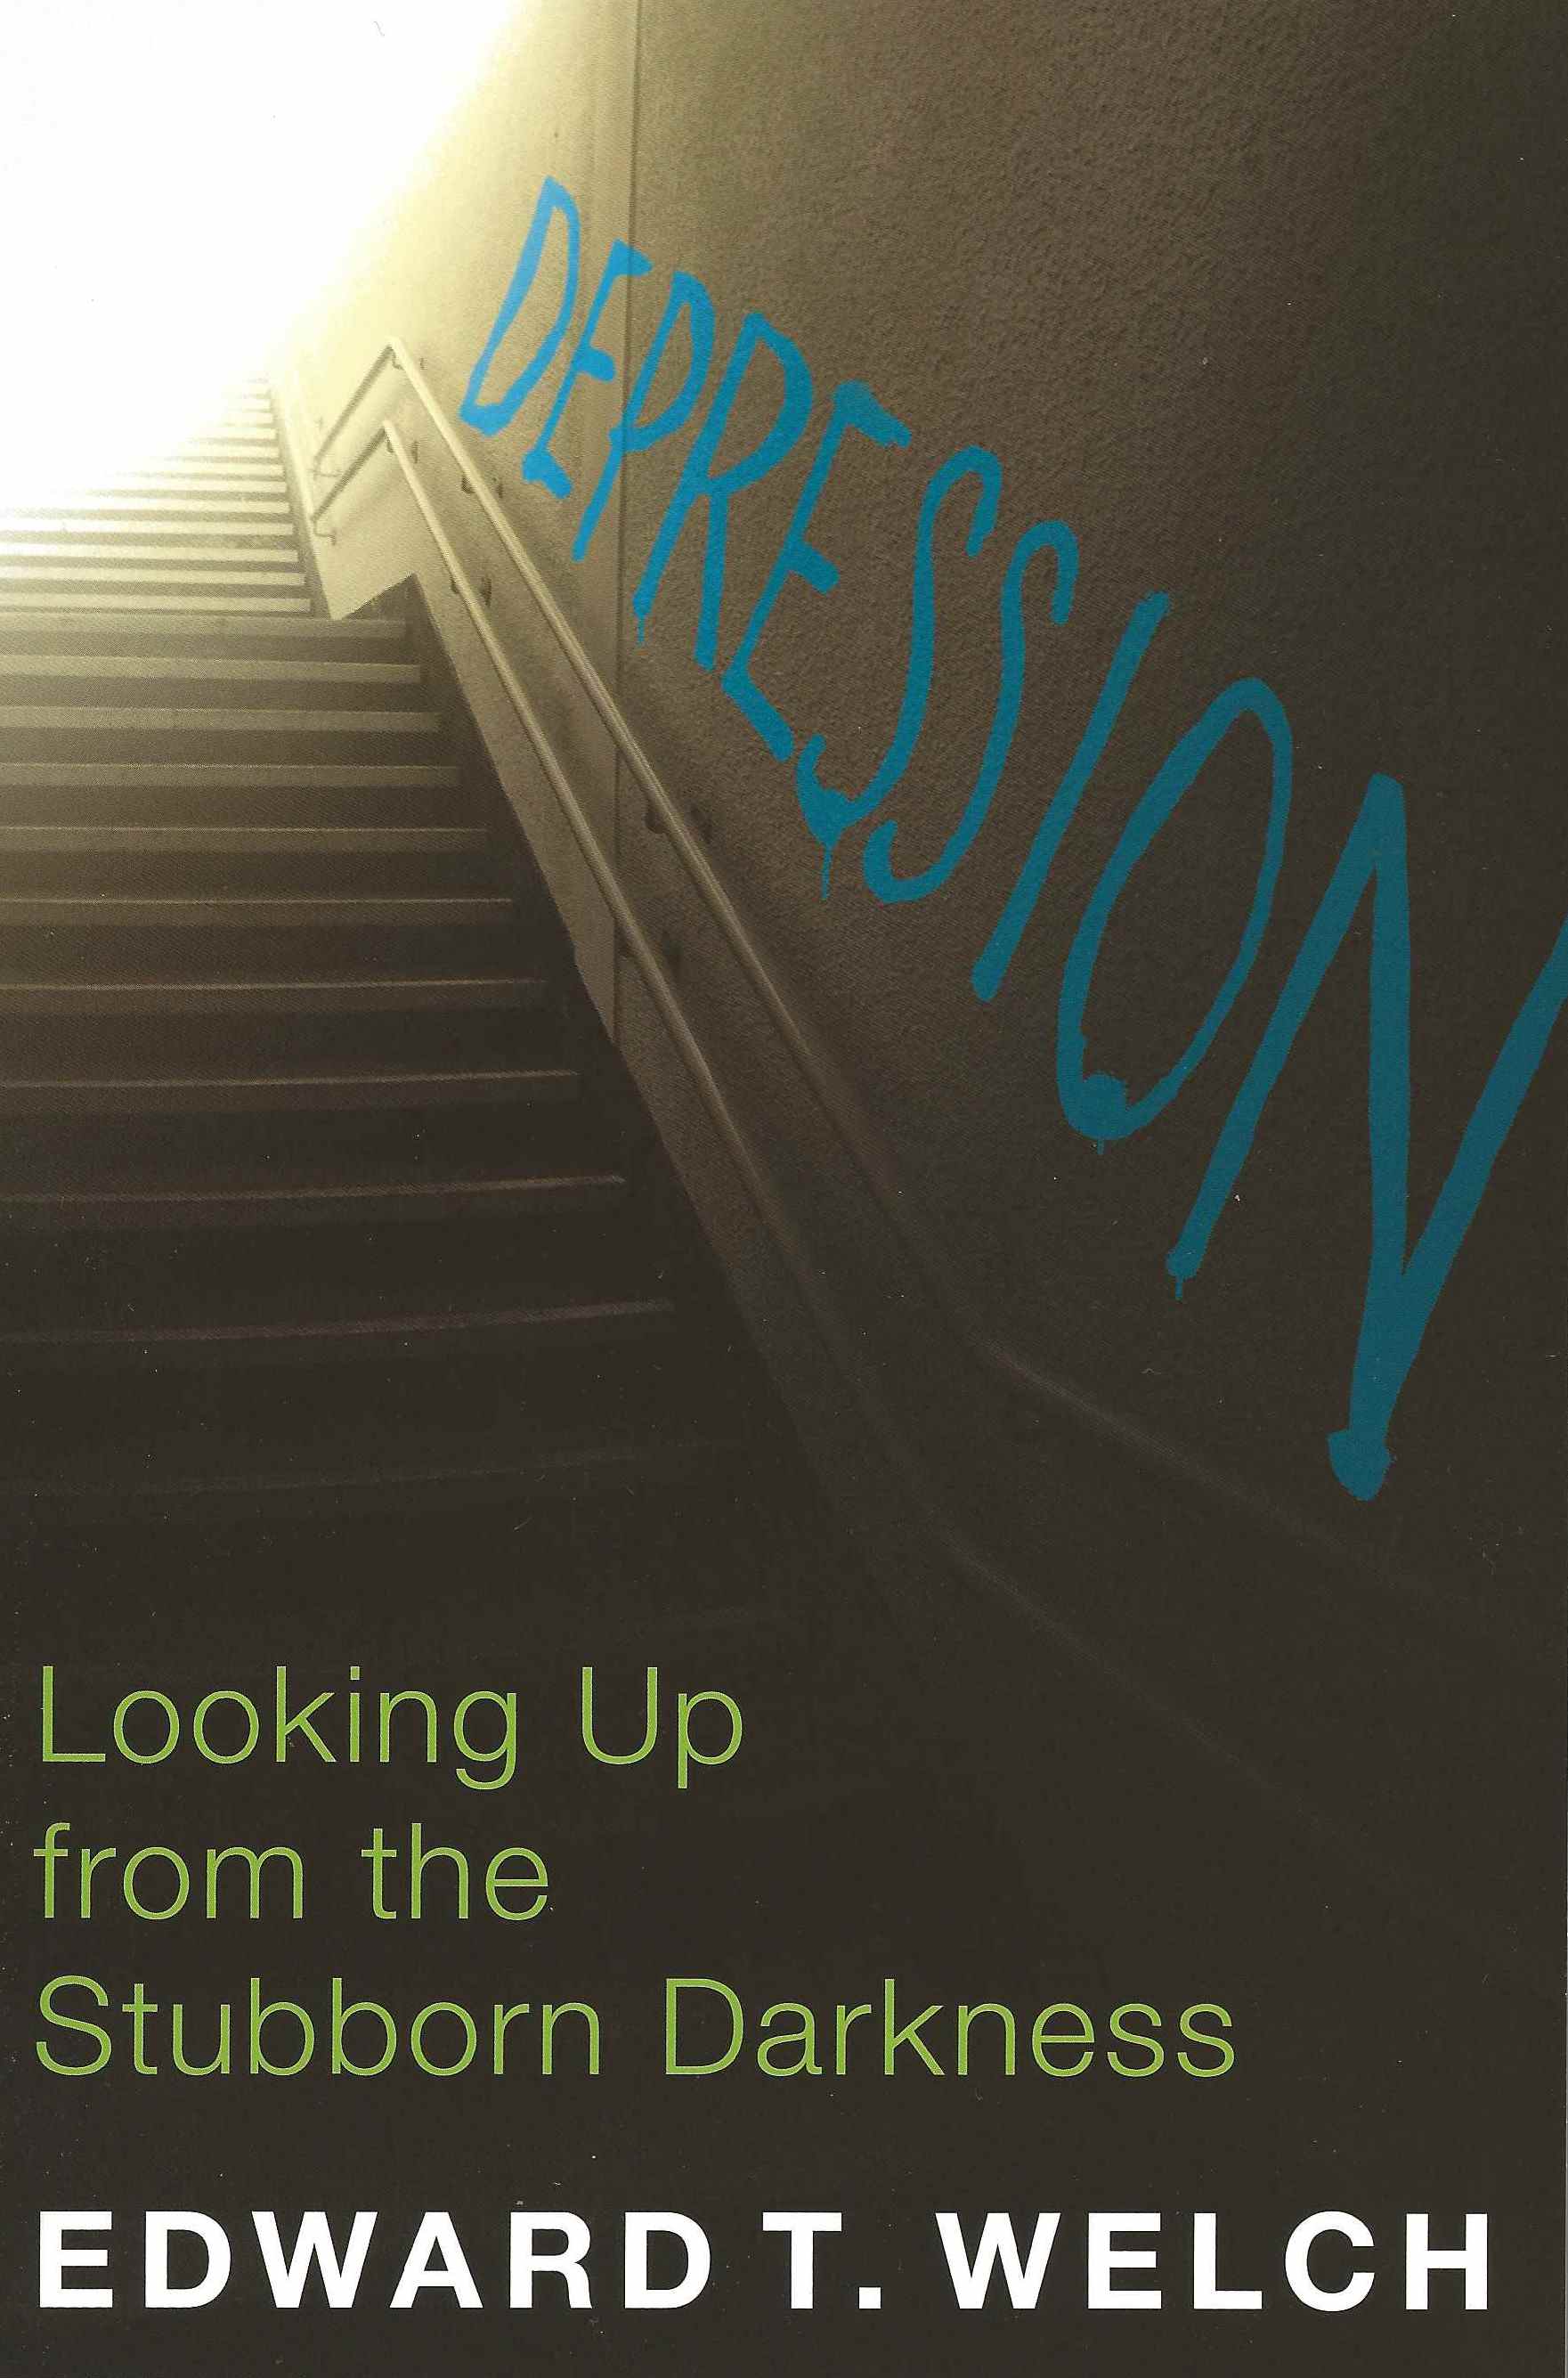 DEPRESSION, LOOKING UP FROM THE STUBBORN DARK Edward T. Welch